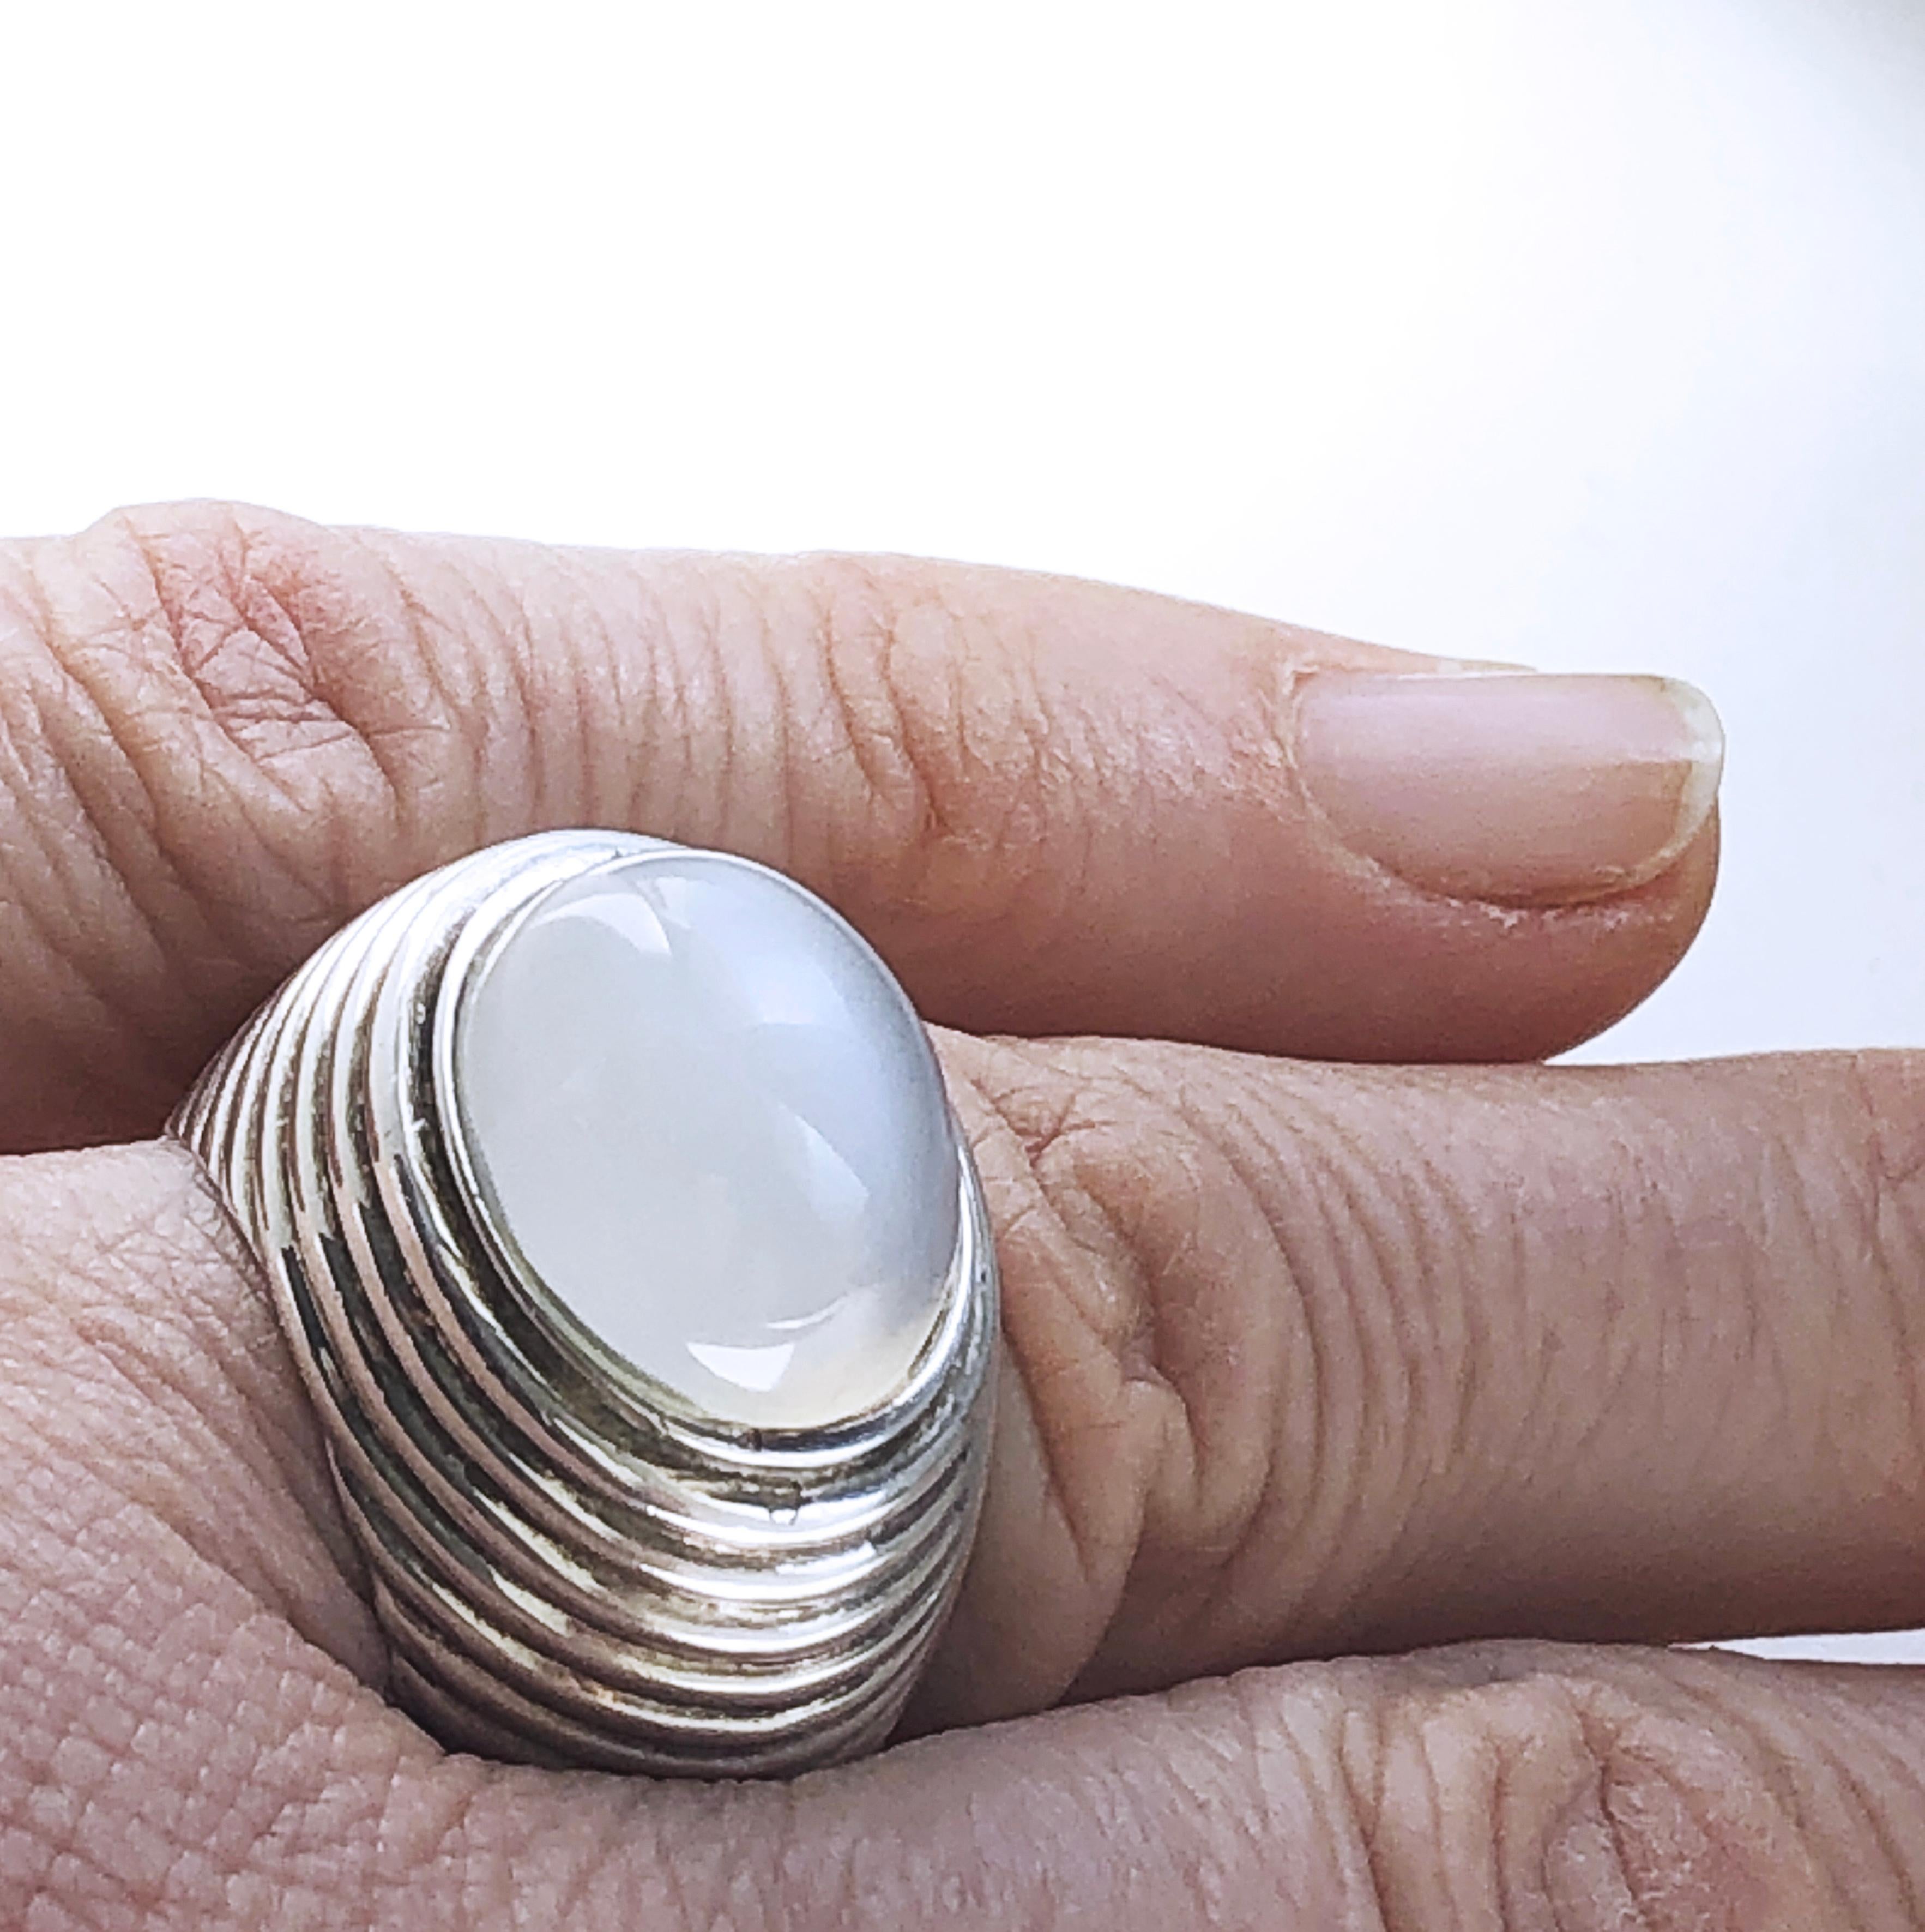 Berca One-of-a-Kind 12 Carat Natural Moonstone Cabochon Sterling Silver Ring 3